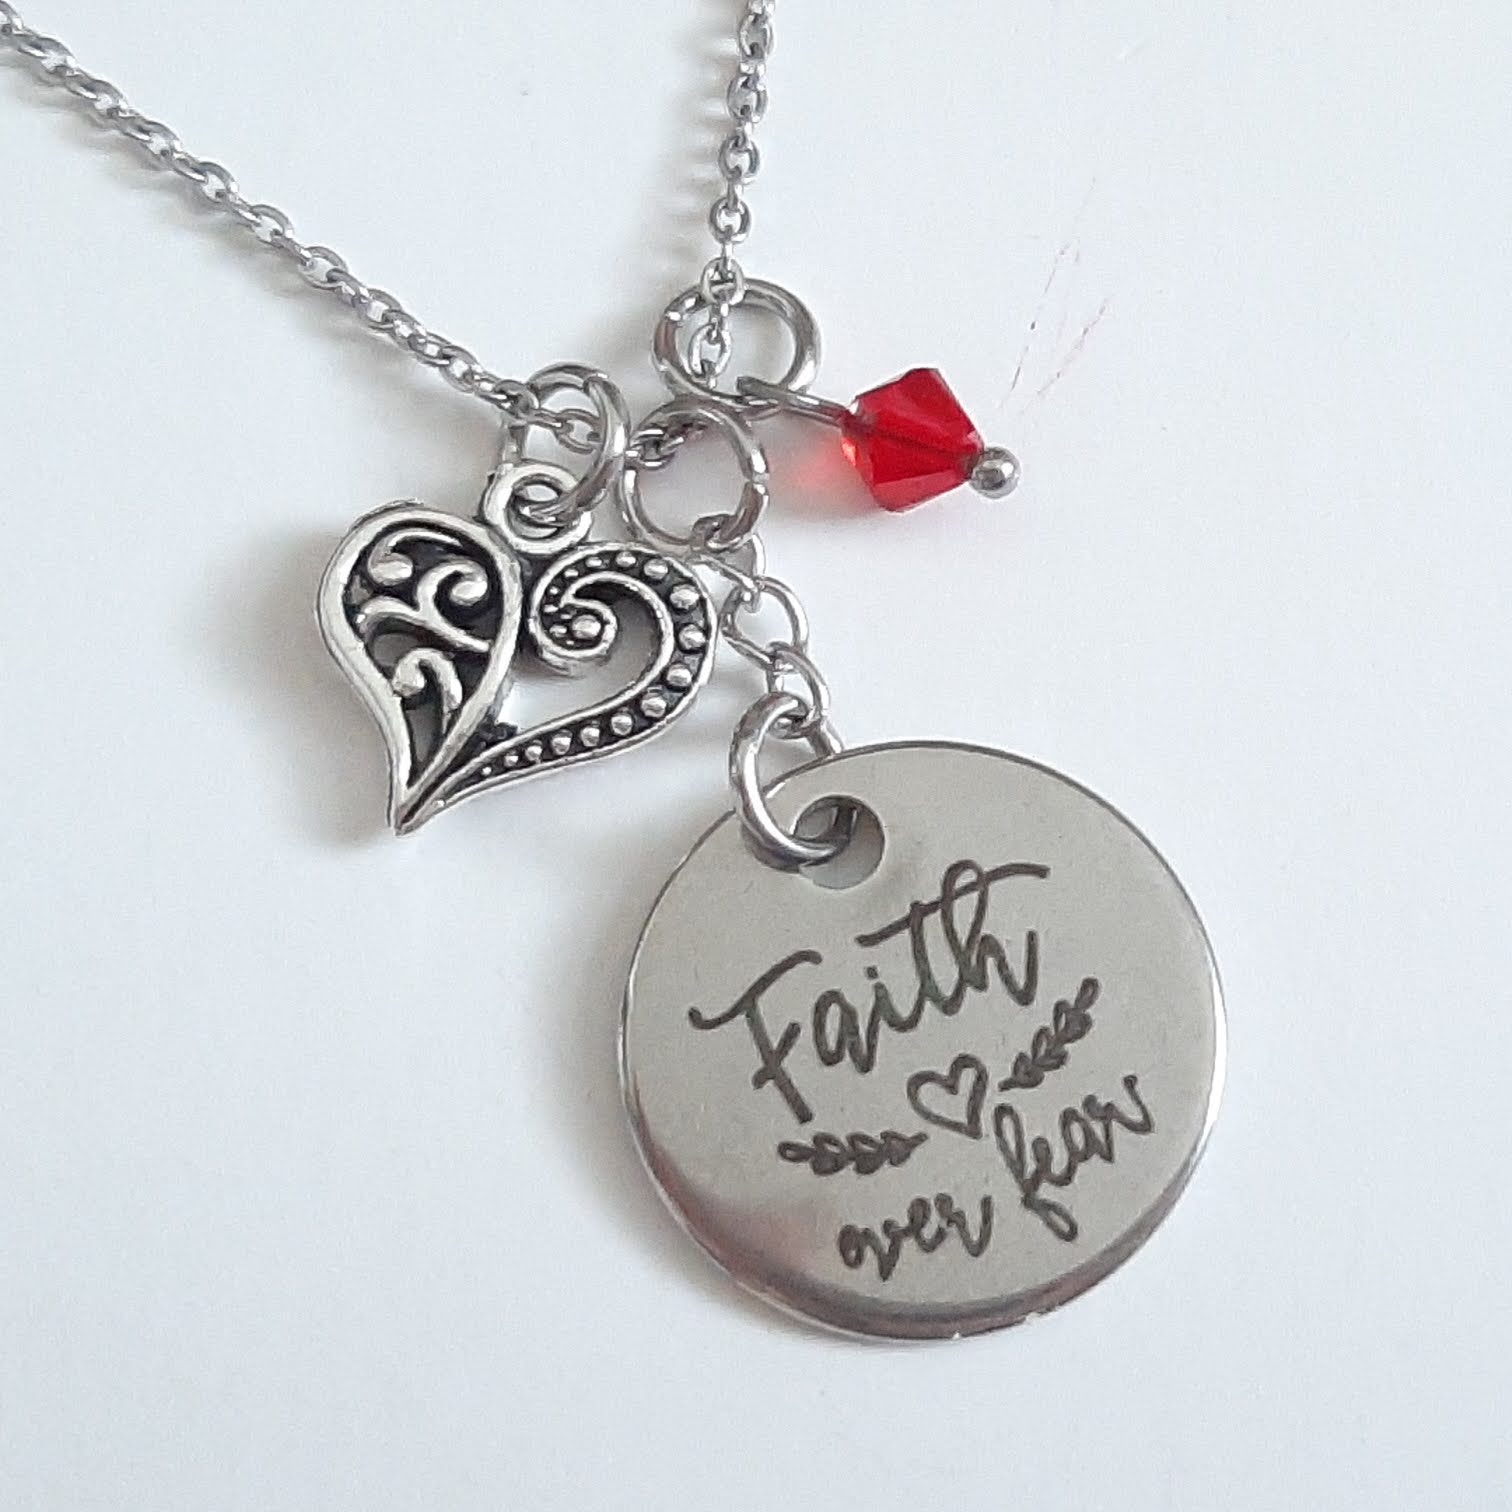 Christian Inspirational Message Pendant Necklace "Faith Over Fear" Your Choice of Charm and Birthstone Color